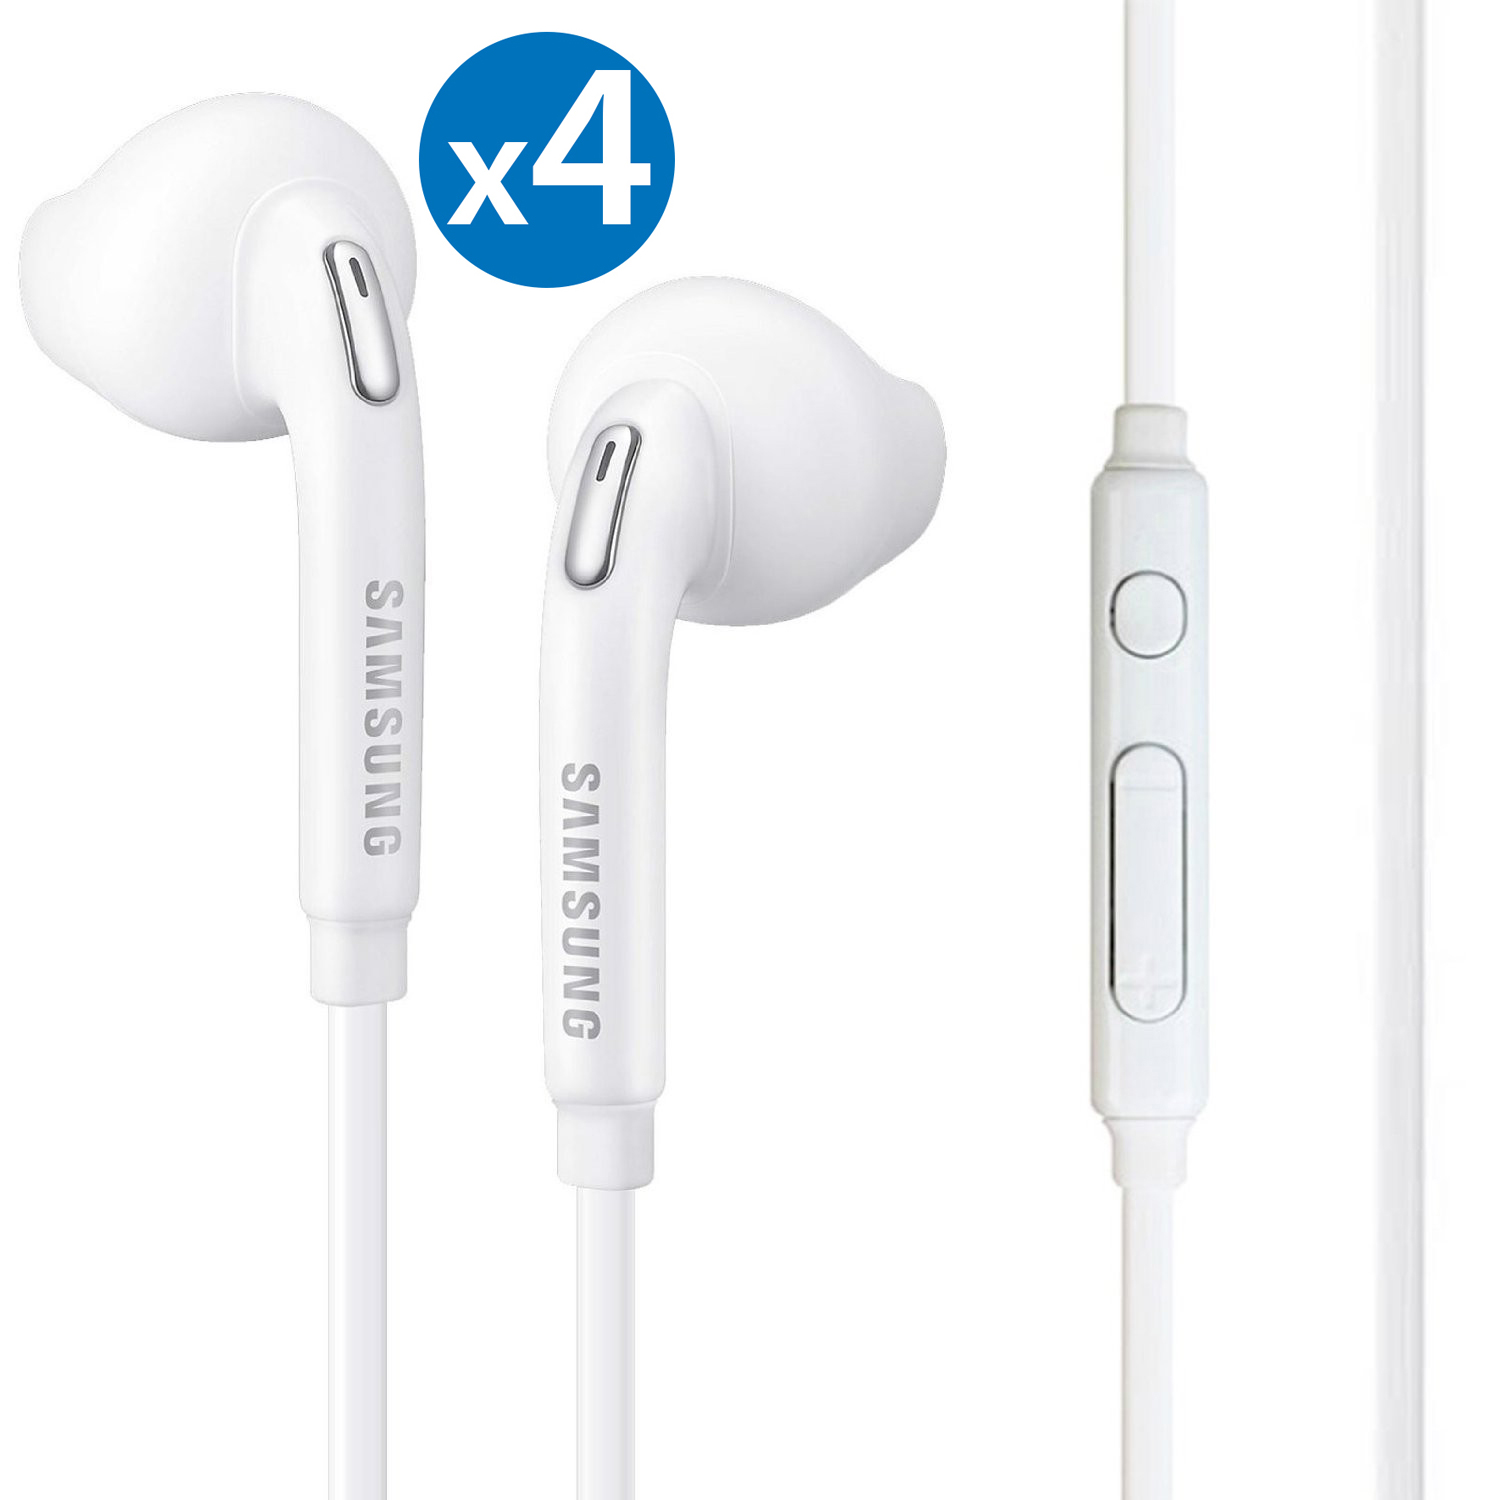 Samsung 3.5mm Earphones/Earbuds/Headphones Stereo Mic&Remote Control Compatible All Samsung Galaxy S6 Edge+/ S6/ Note 8/Note 9/ S8/S8+ S9/S9+ Compatible iPhone 6/6plus/6S/6S Plus/5S/5c [4Pack] - image 1 of 5